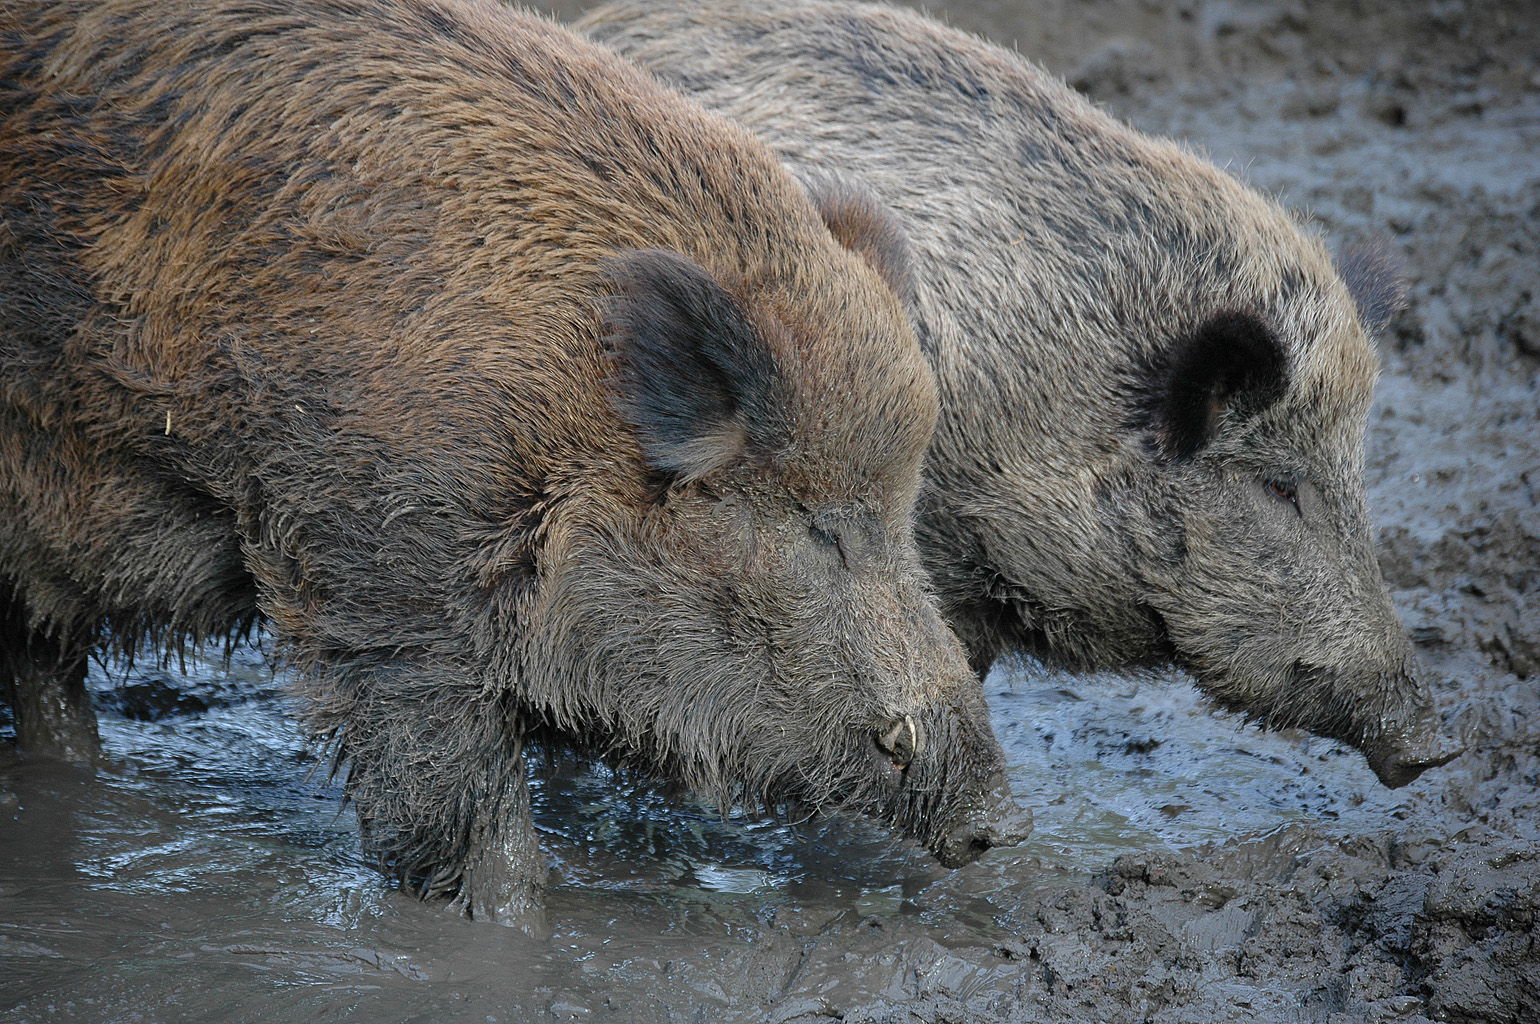 Close up image of two wild boar walking through mud with their snouts and feet covered in wet mud.